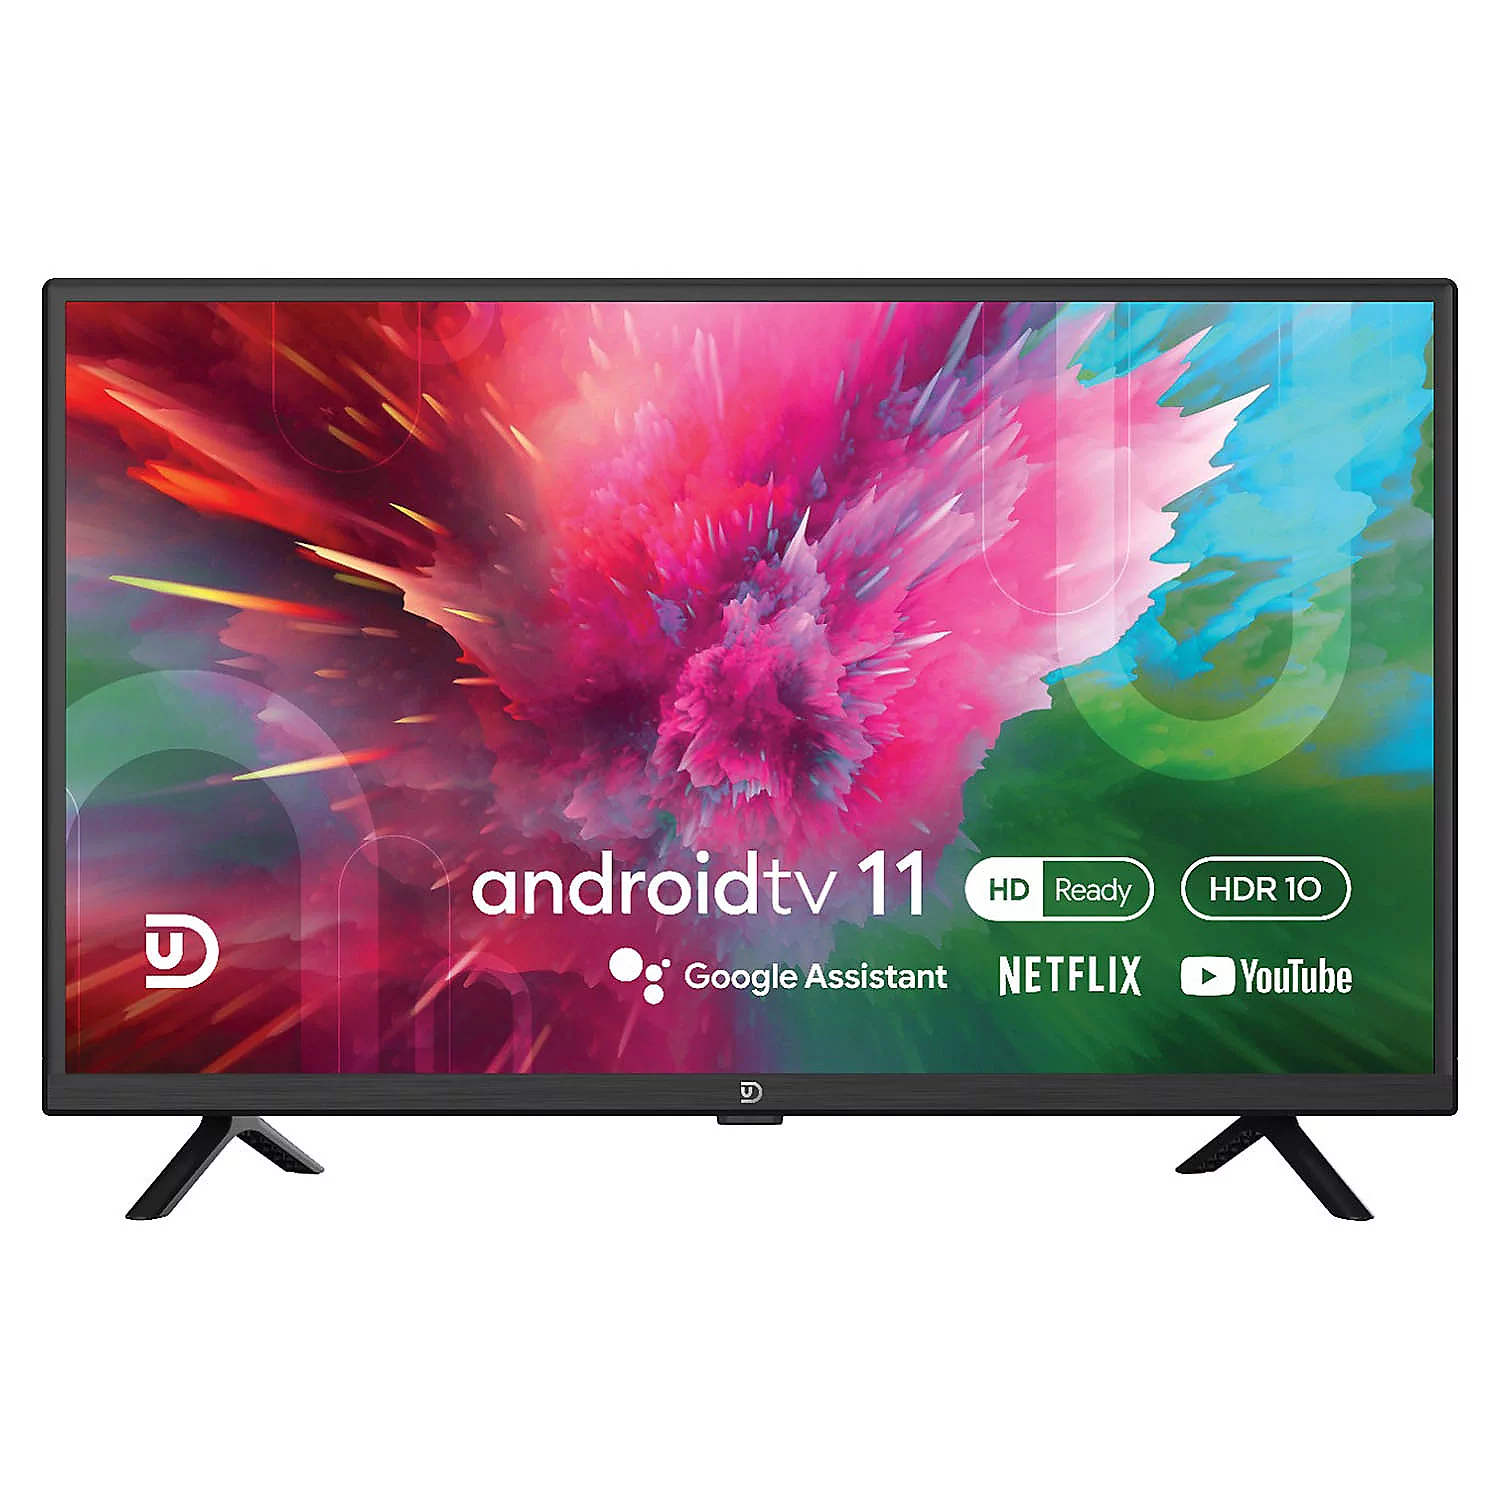 UD 40F5210 40" Full HD Android TV 